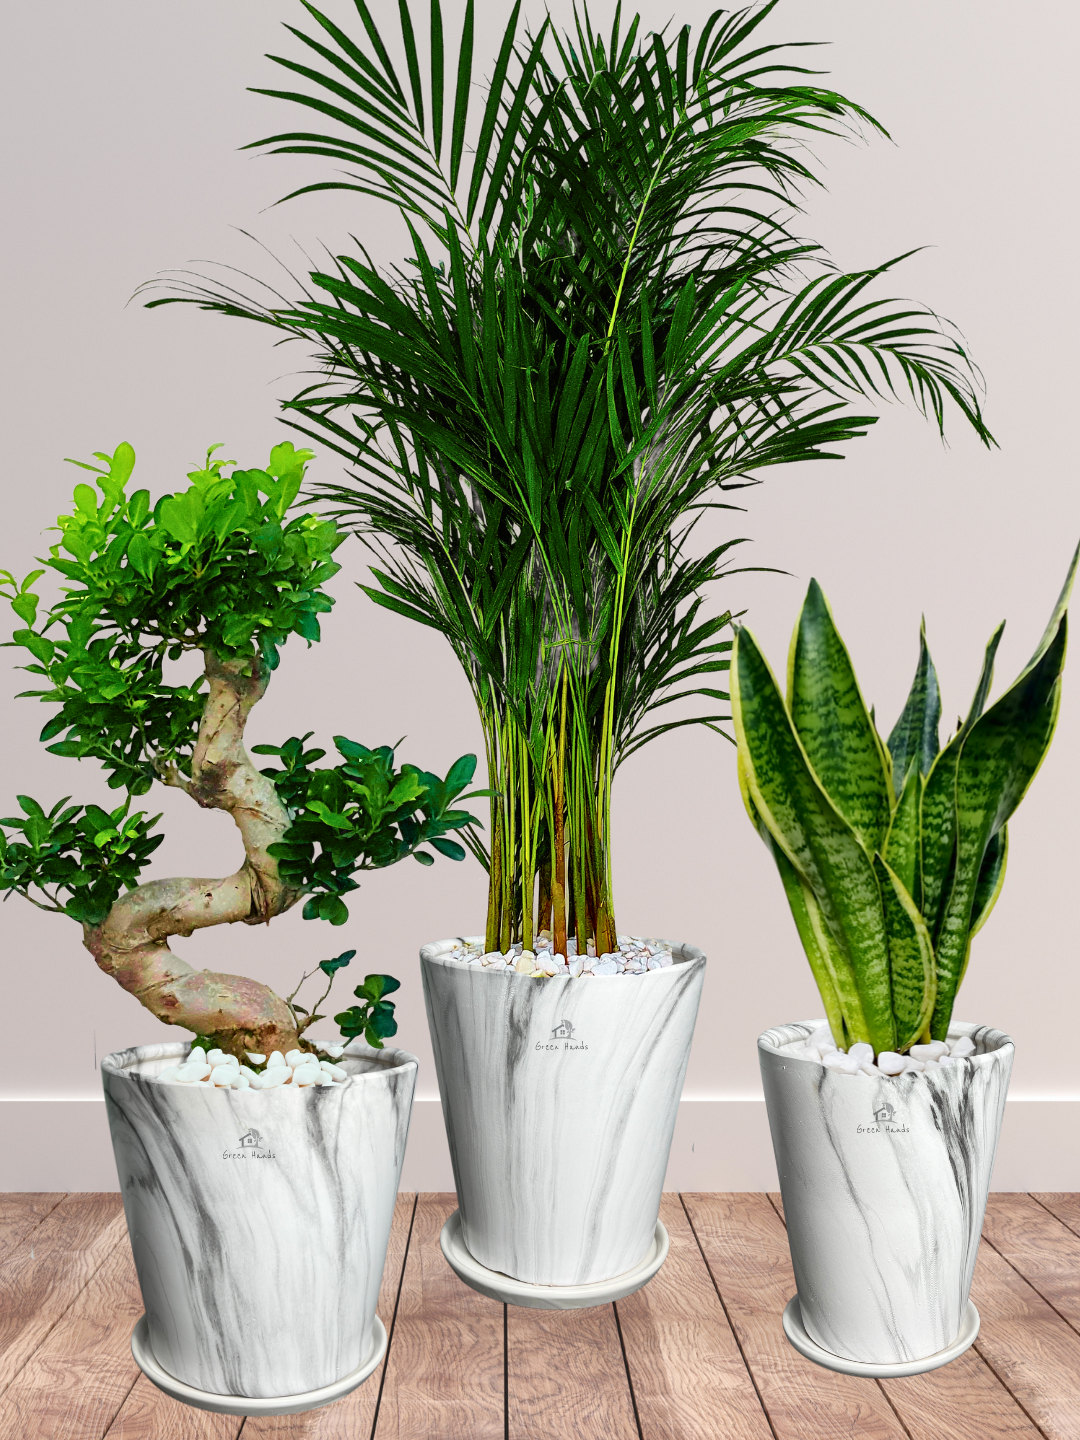 Three Plants Bundle: Potted Areca Palm, Snake Plant, and S Bonsai Tree - A Complete Indoor Garden Solution